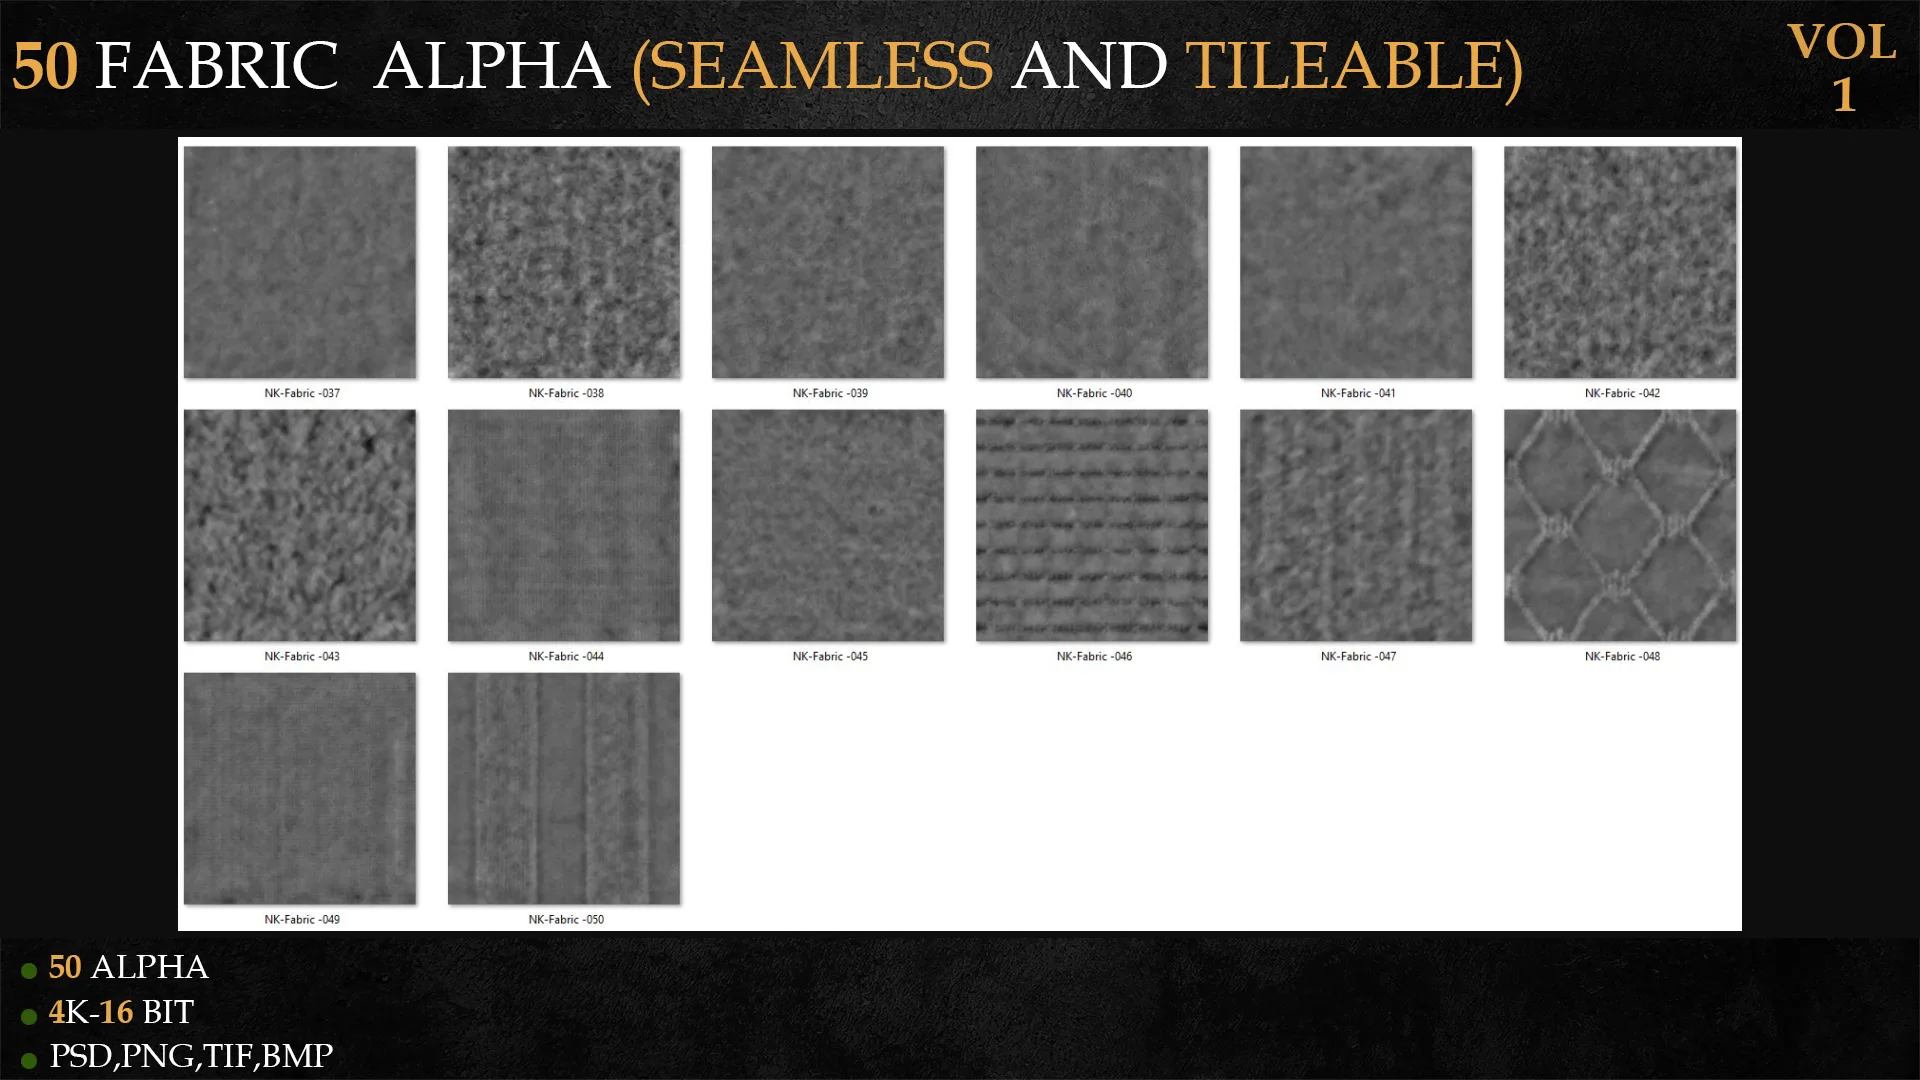 50 FABRIC ALPHA (SEAMLESS AND TILEABLE)-VOL 1